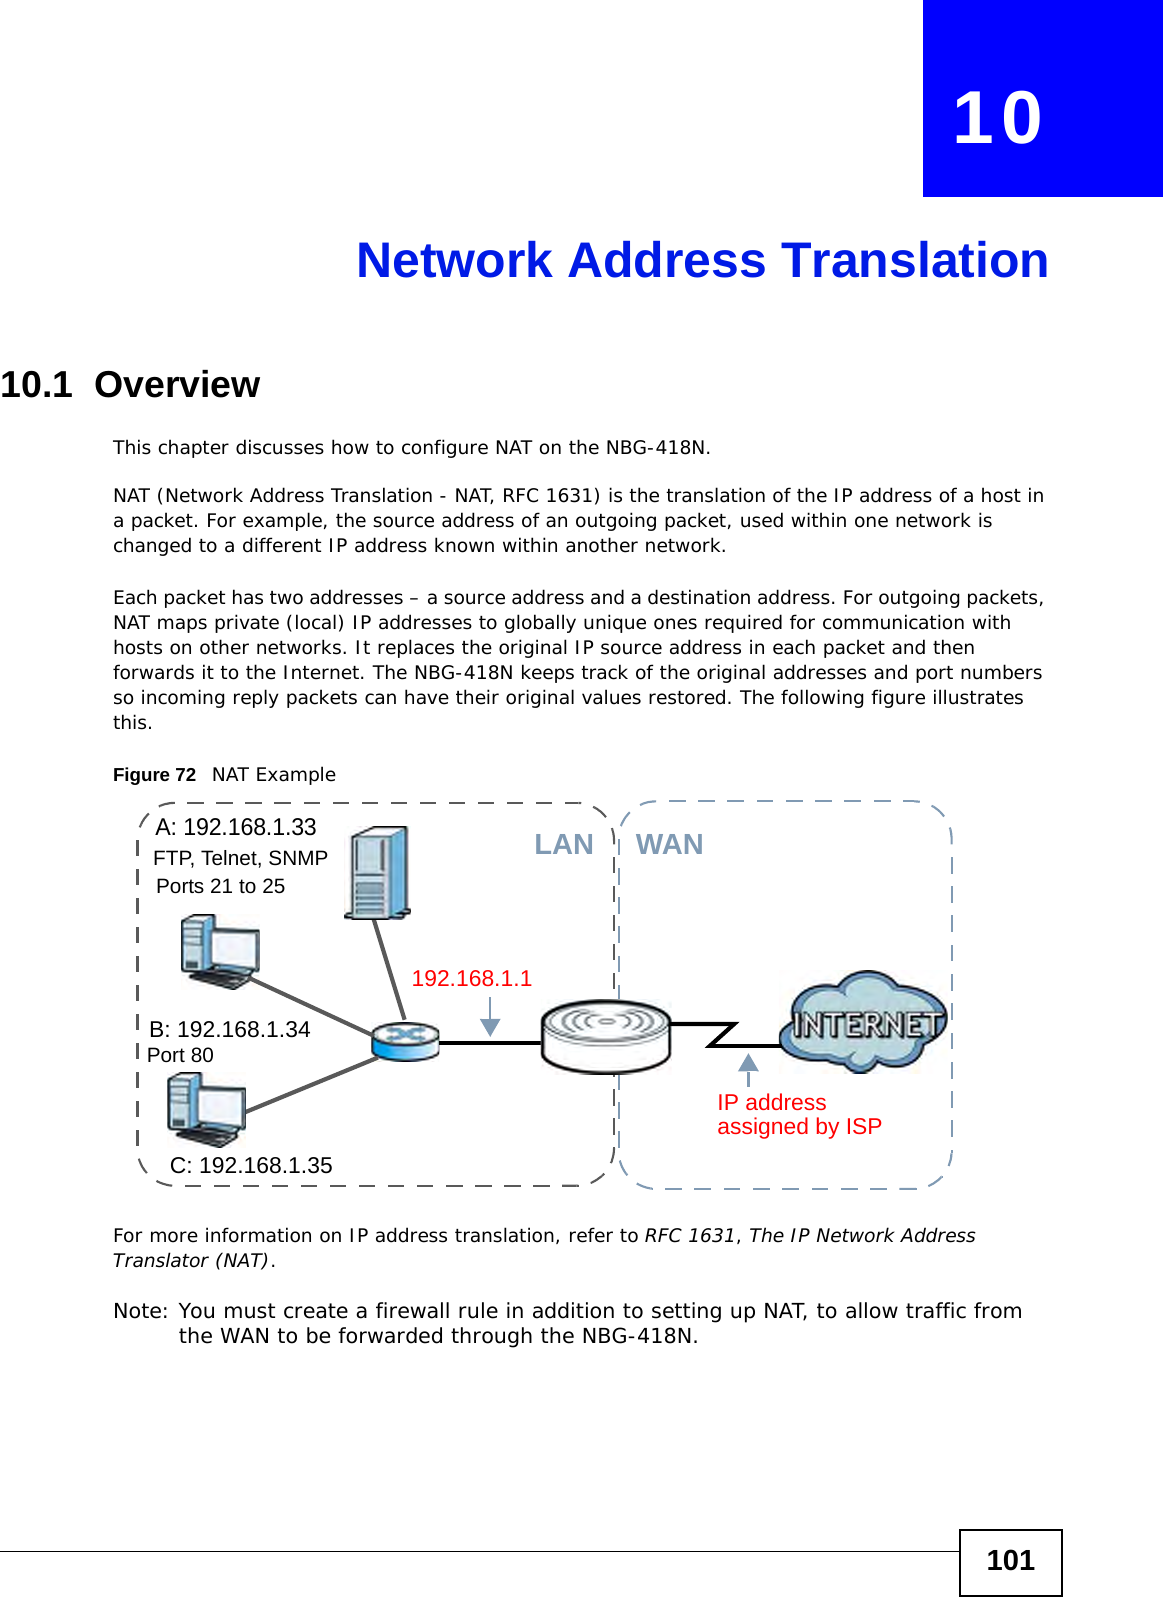 101CHAPTER   10Network Address Translation10.1  Overview   This chapter discusses how to configure NAT on the NBG-418N.NAT (Network Address Translation - NAT, RFC 1631) is the translation of the IP address of a host in a packet. For example, the source address of an outgoing packet, used within one network is changed to a different IP address known within another network.Each packet has two addresses – a source address and a destination address. For outgoing packets, NAT maps private (local) IP addresses to globally unique ones required for communication with hosts on other networks. It replaces the original IP source address in each packet and then forwards it to the Internet. The NBG-418N keeps track of the original addresses and port numbers so incoming reply packets can have their original values restored. The following figure illustrates this.Figure 72   NAT ExampleFor more information on IP address translation, refer to RFC 1631, The IP Network Address Translator (NAT). Note: You must create a firewall rule in addition to setting up NAT, to allow traffic from the WAN to be forwarded through the NBG-418N.A: 192.168.1.33B: 192.168.1.34C: 192.168.1.35IP address 192.168.1.1WANLANassigned by ISPFTP, Telnet, SNMPPort 80Ports 21 to 25